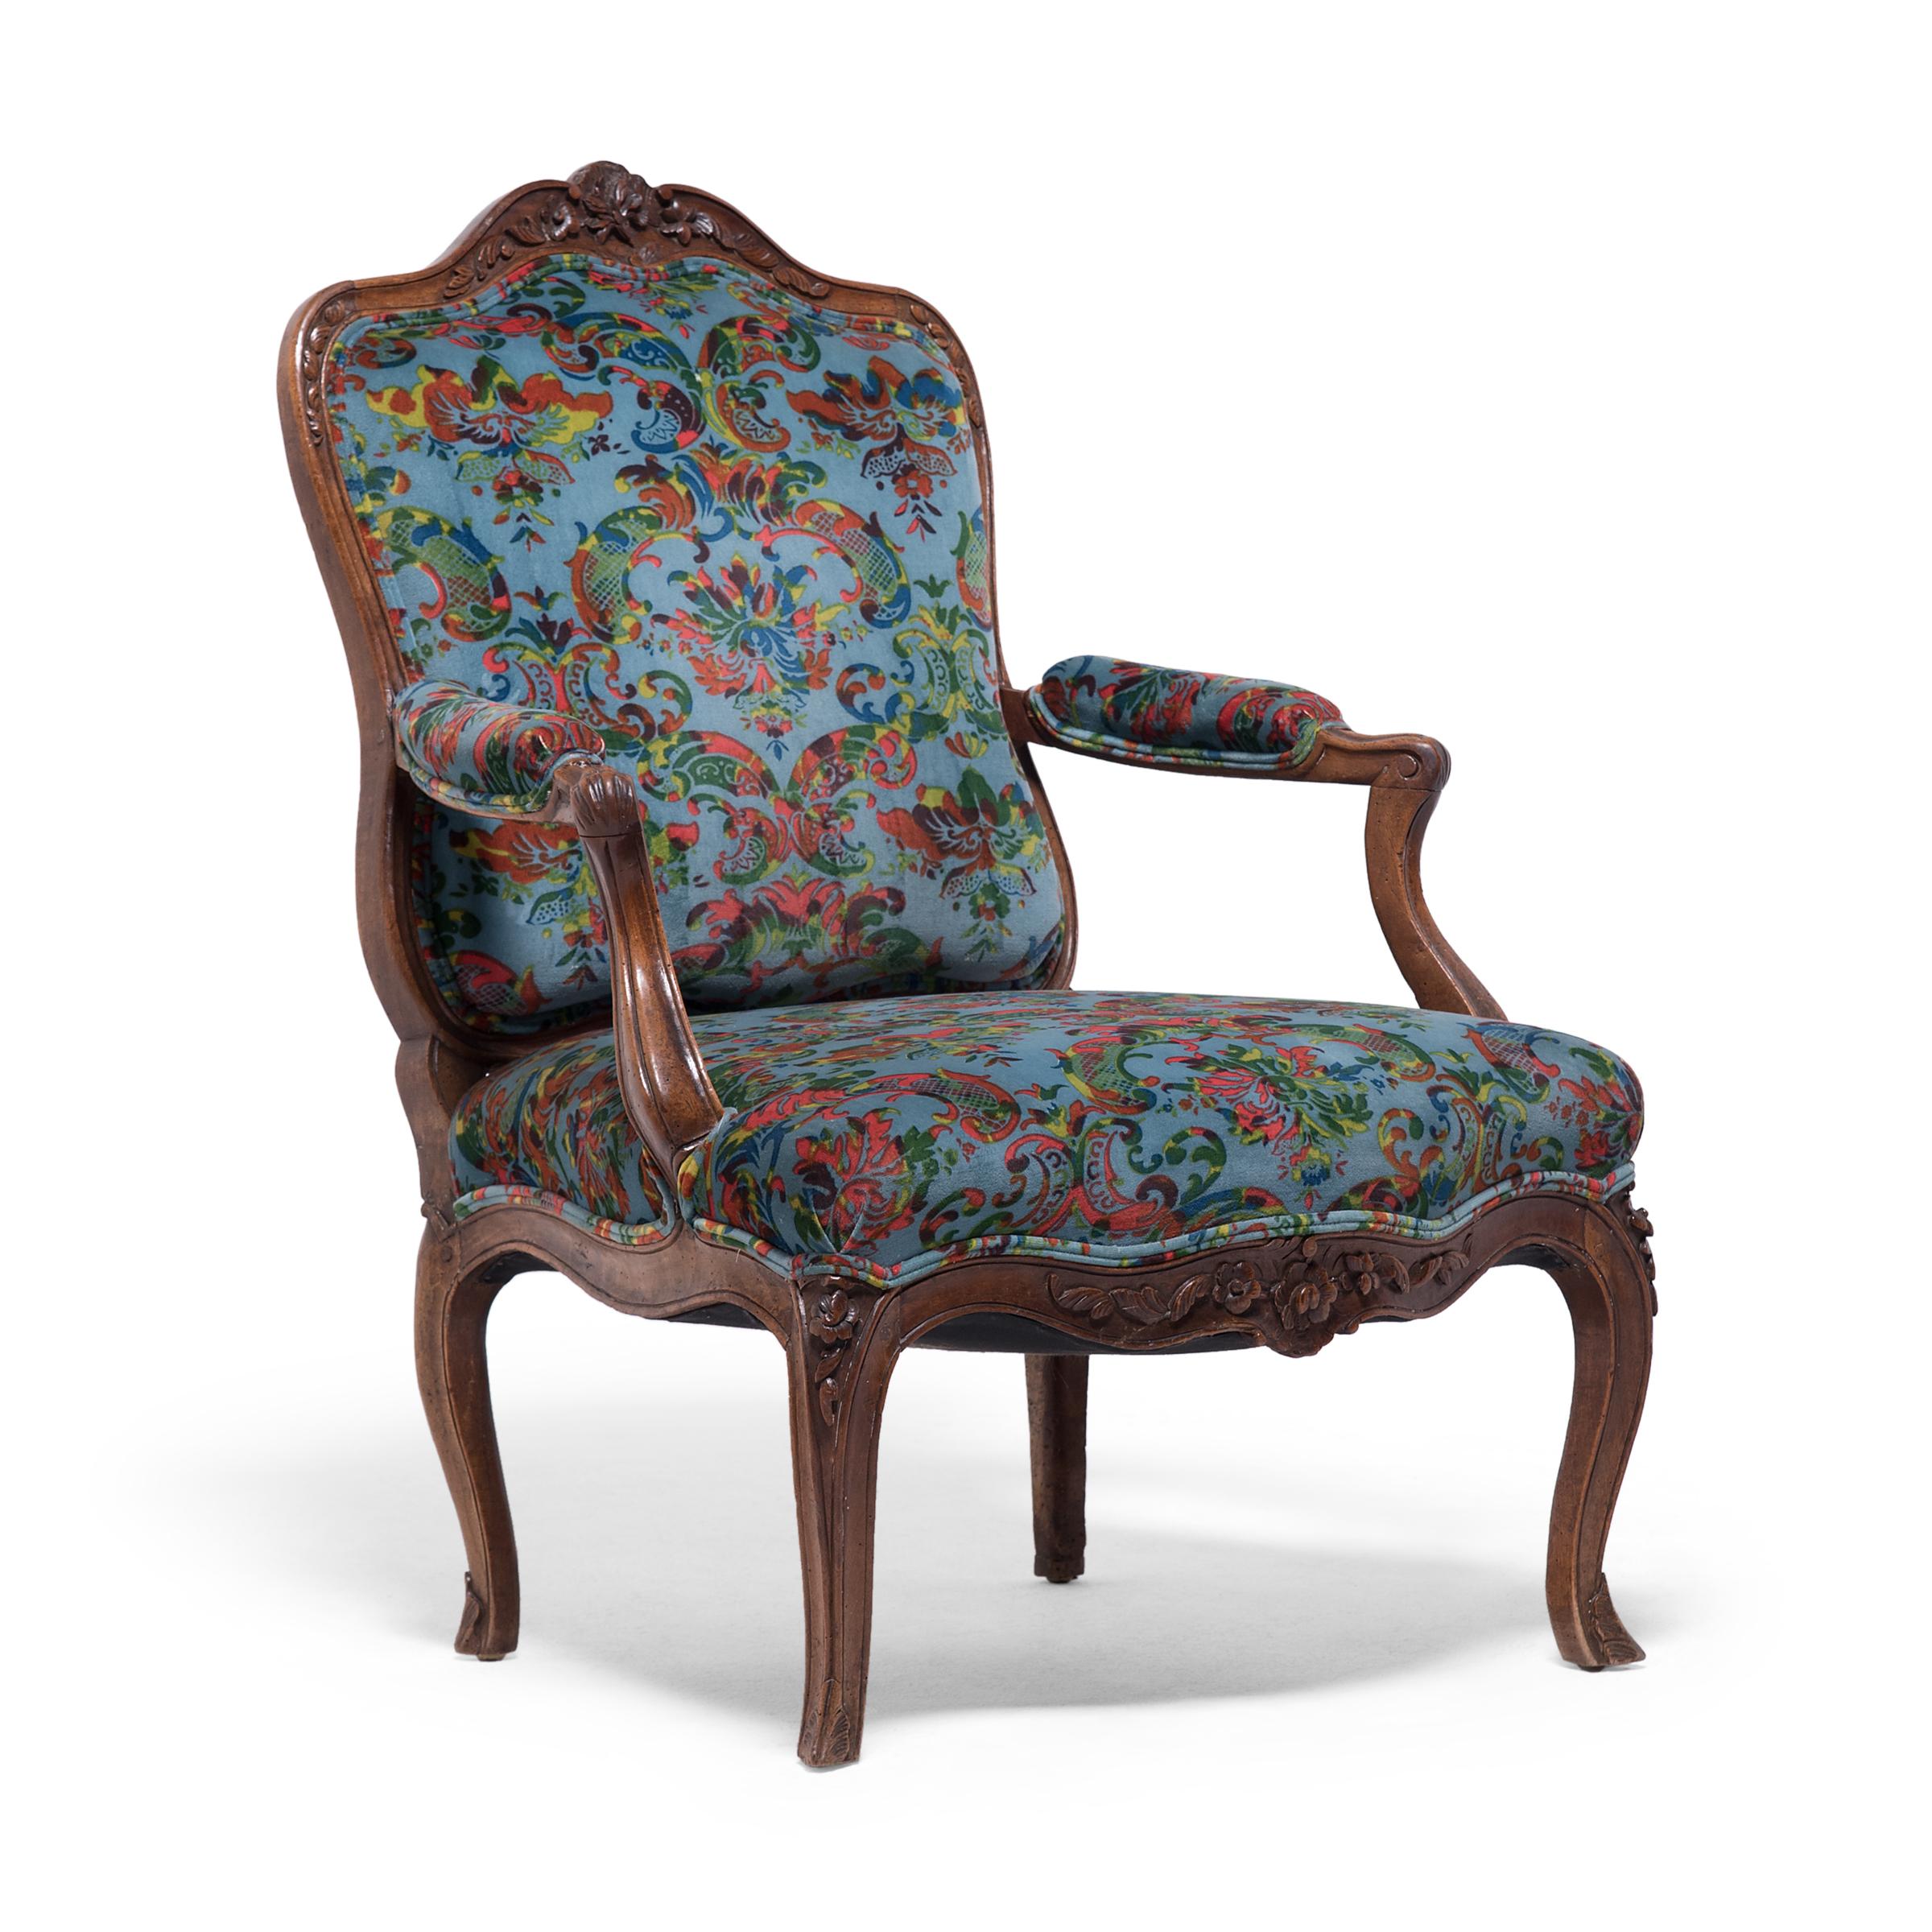 This 19th-century French upholstered armchair wonderfully embodies the Louis XV style with rich ornamentation and nary a straight line in sight. The chair has a sinuous wooden frame with a wide seat, flat back, and open, padded armrests. The crest